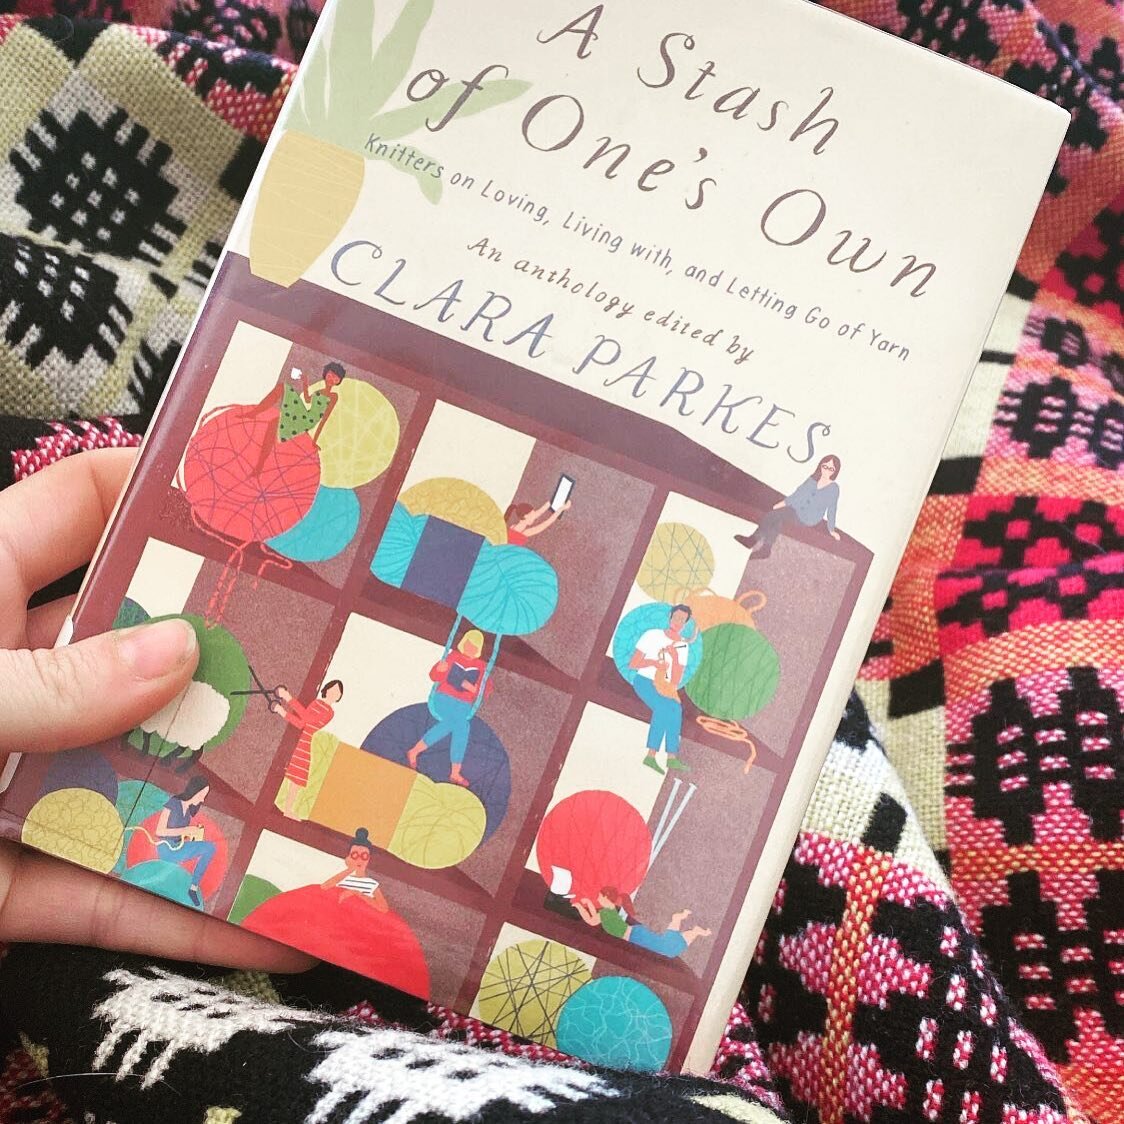 Thank you @claraparkes for putting together this collection of essays. So much ground covered here - love, grief, identity, gifting, hope, materialism, feminism, sentimentalism and more. I now see my stash as a growing collection of memories and futu